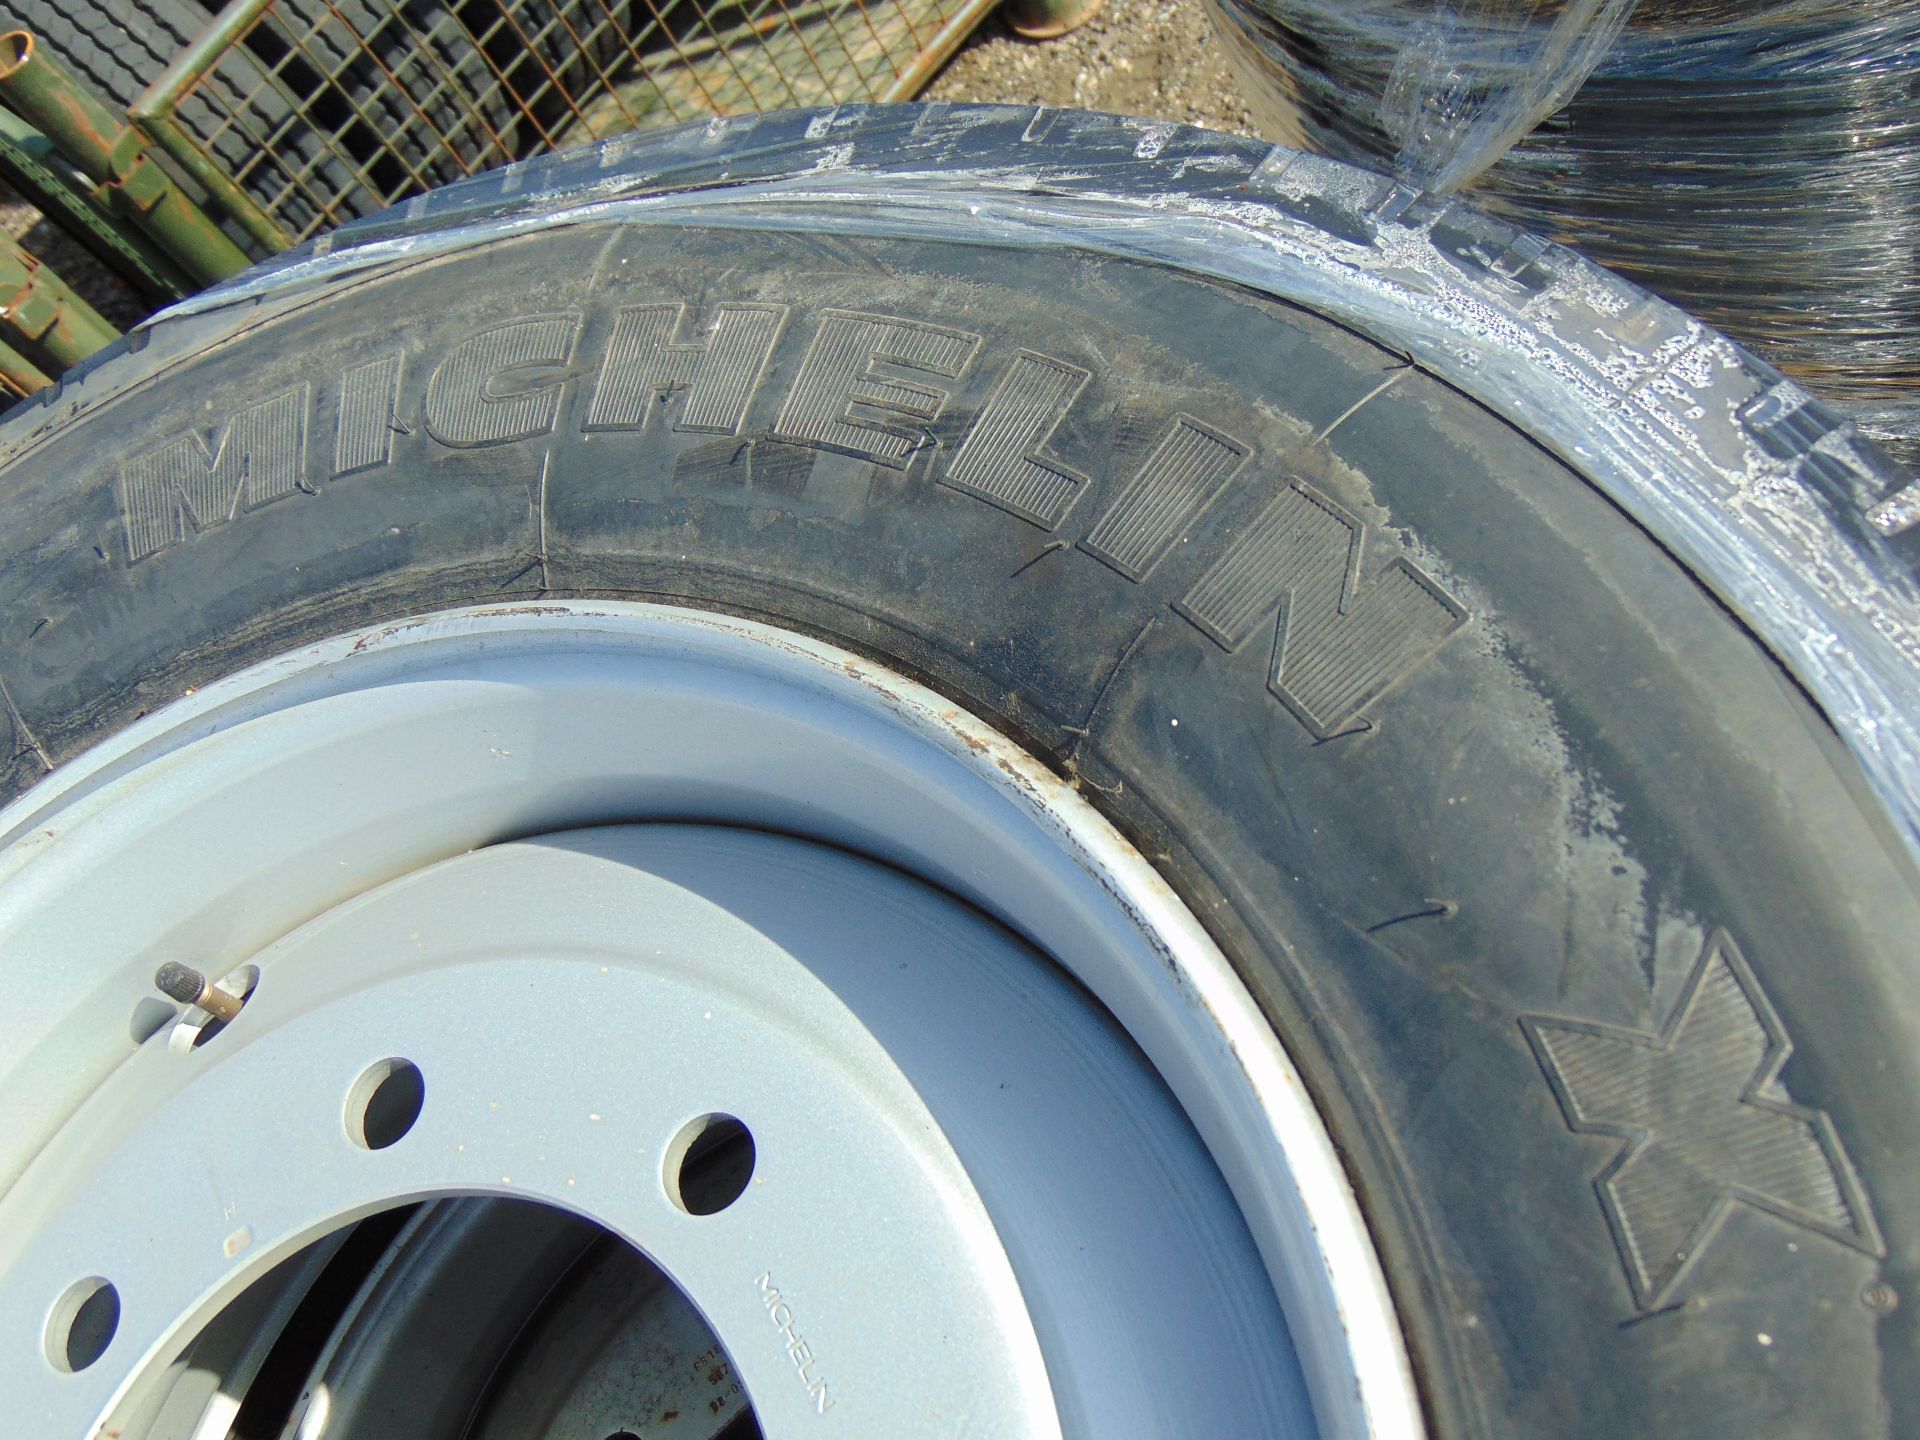 5 x Michelin XTE 2 285/70 R19.5 Tyres with 8 Stud Rims - Image 7 of 8